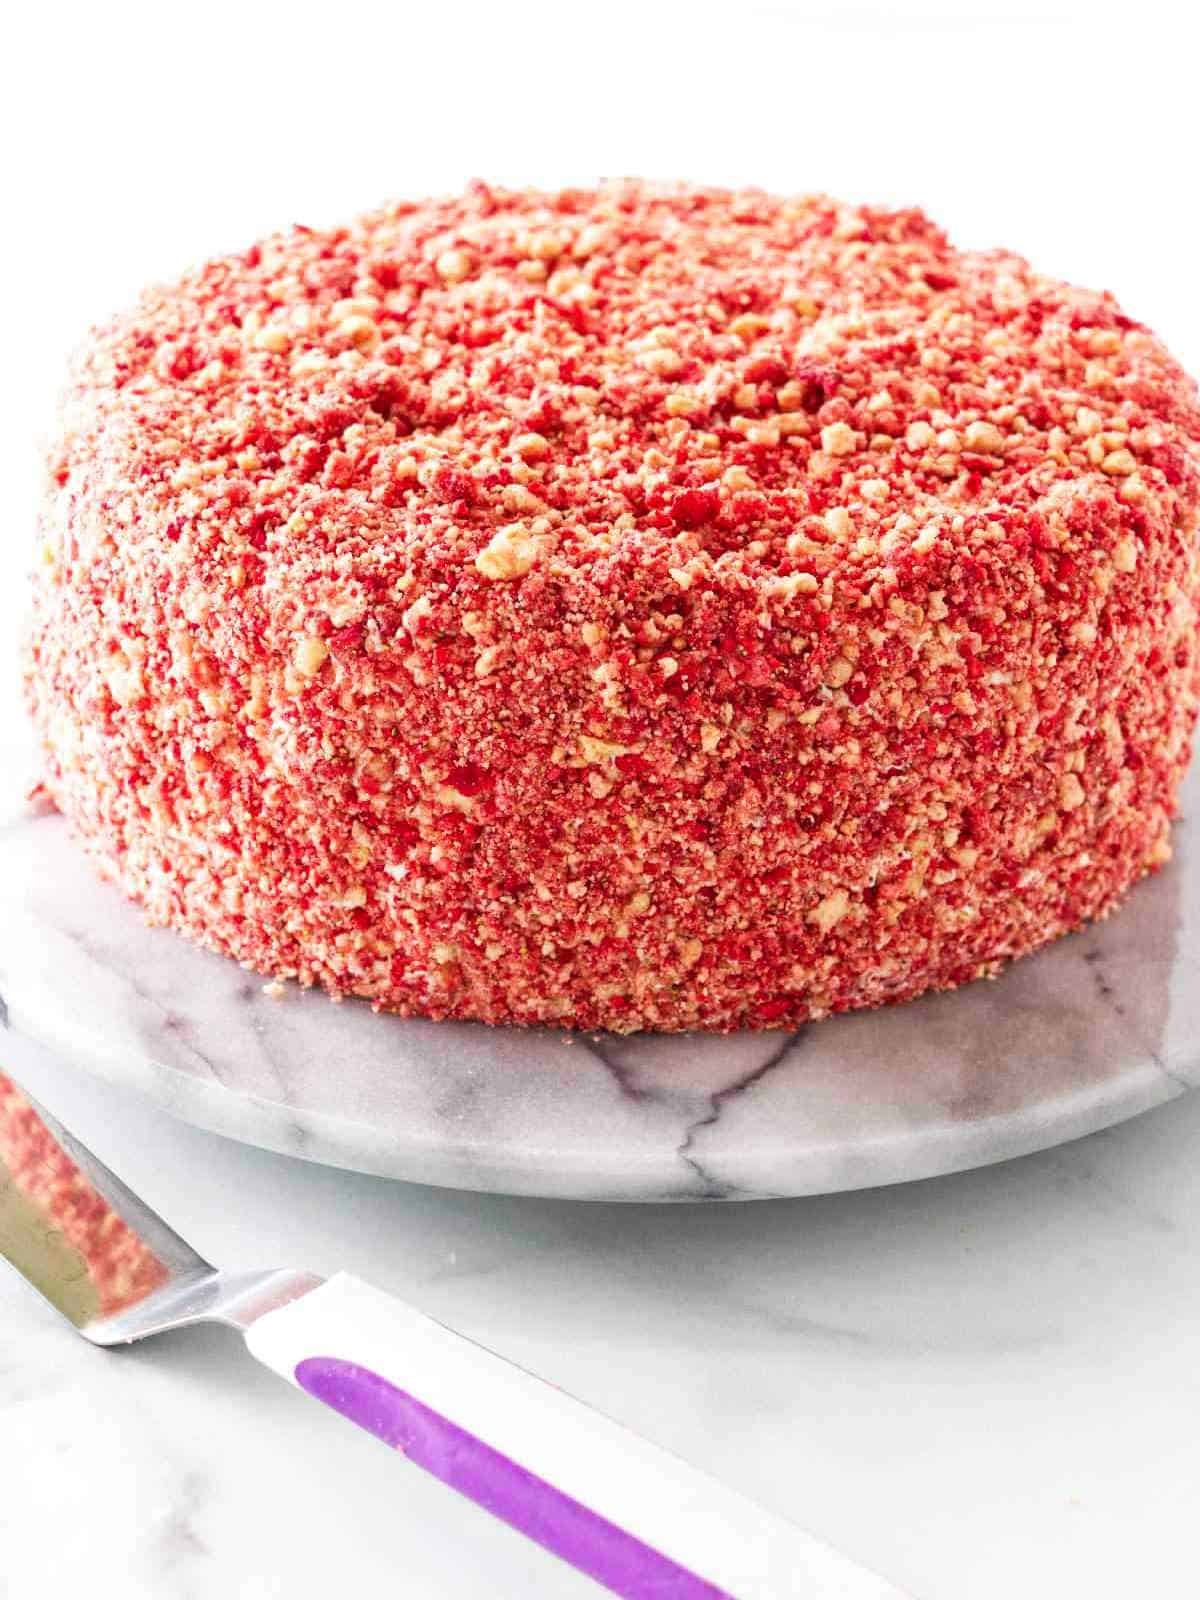 Cake with a strawberry crunch crumble on sides and top.